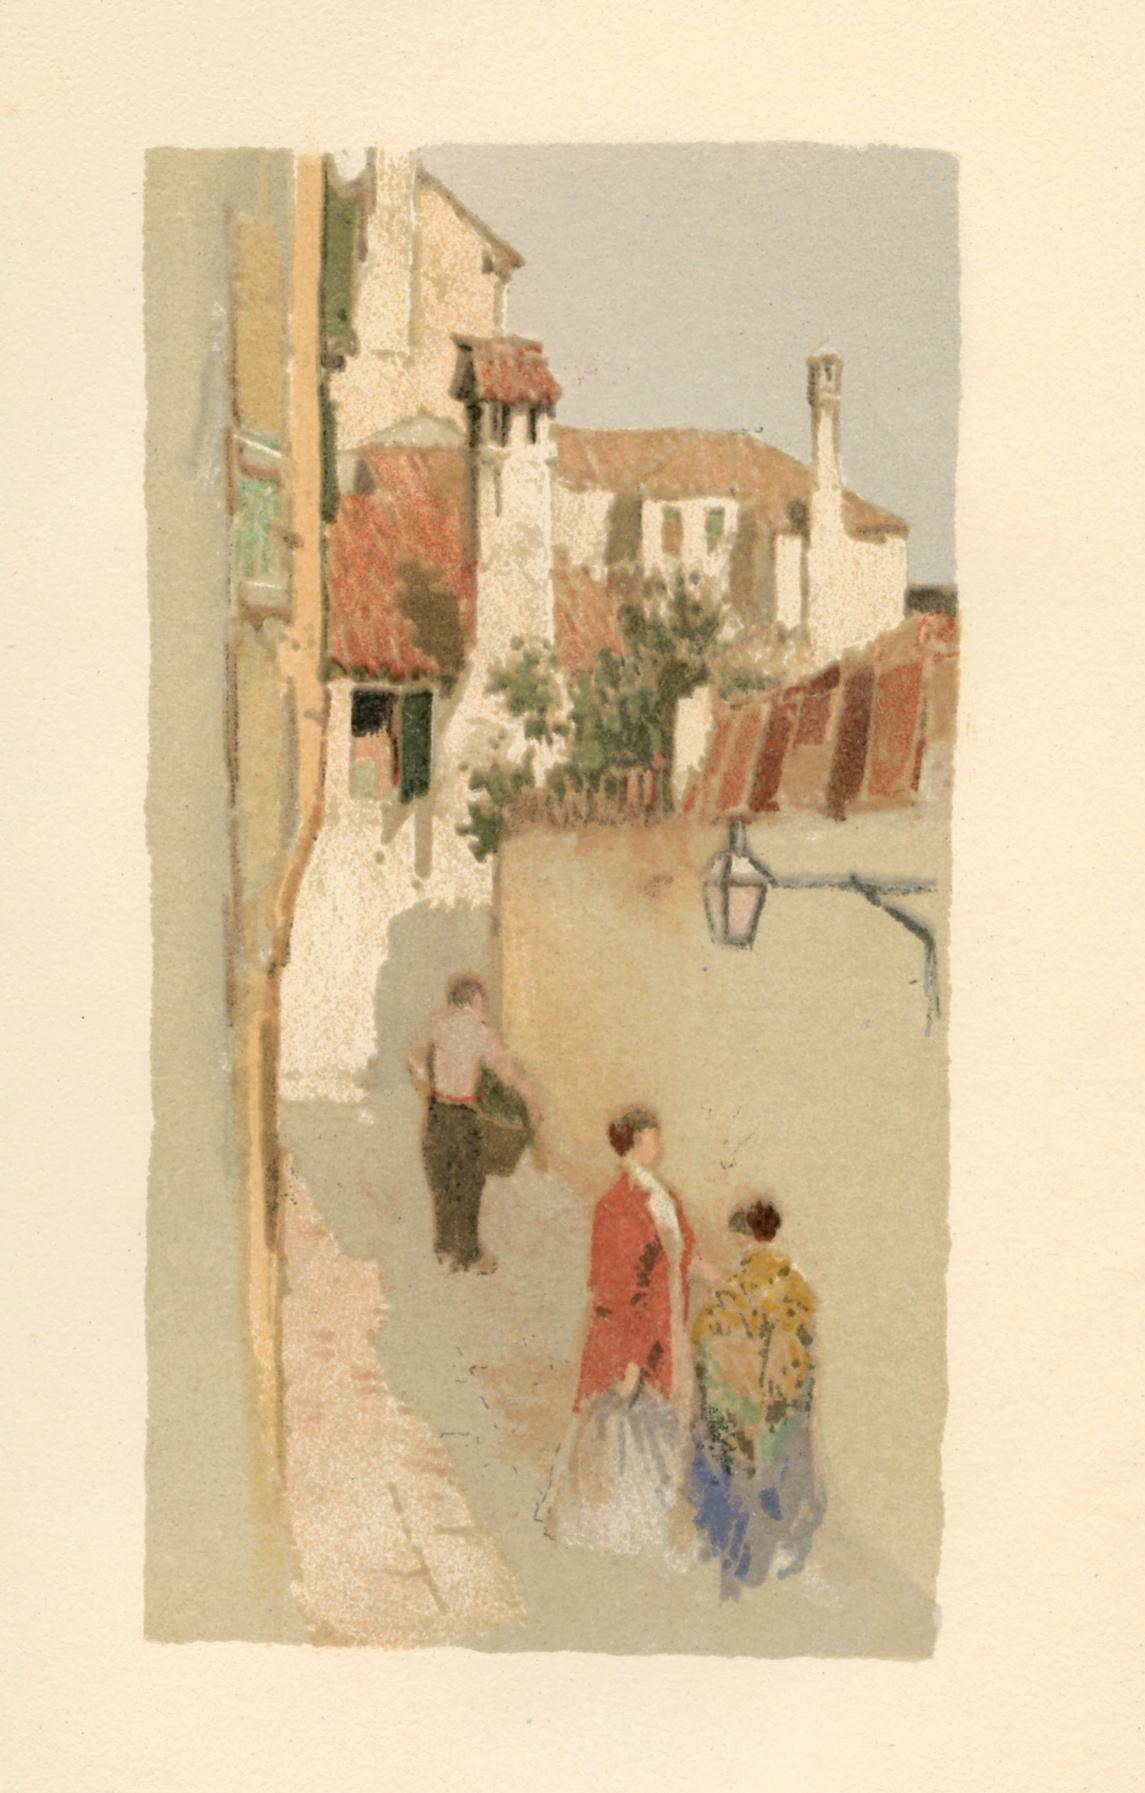 Medium: chromolithograph (after the watercolor). This delightful antique lithograph was published in a small edition in 1892 to illustrate a rare volume with scenes of Venetian life. A beautiful impression printed on cream wove paper. Image size: 4